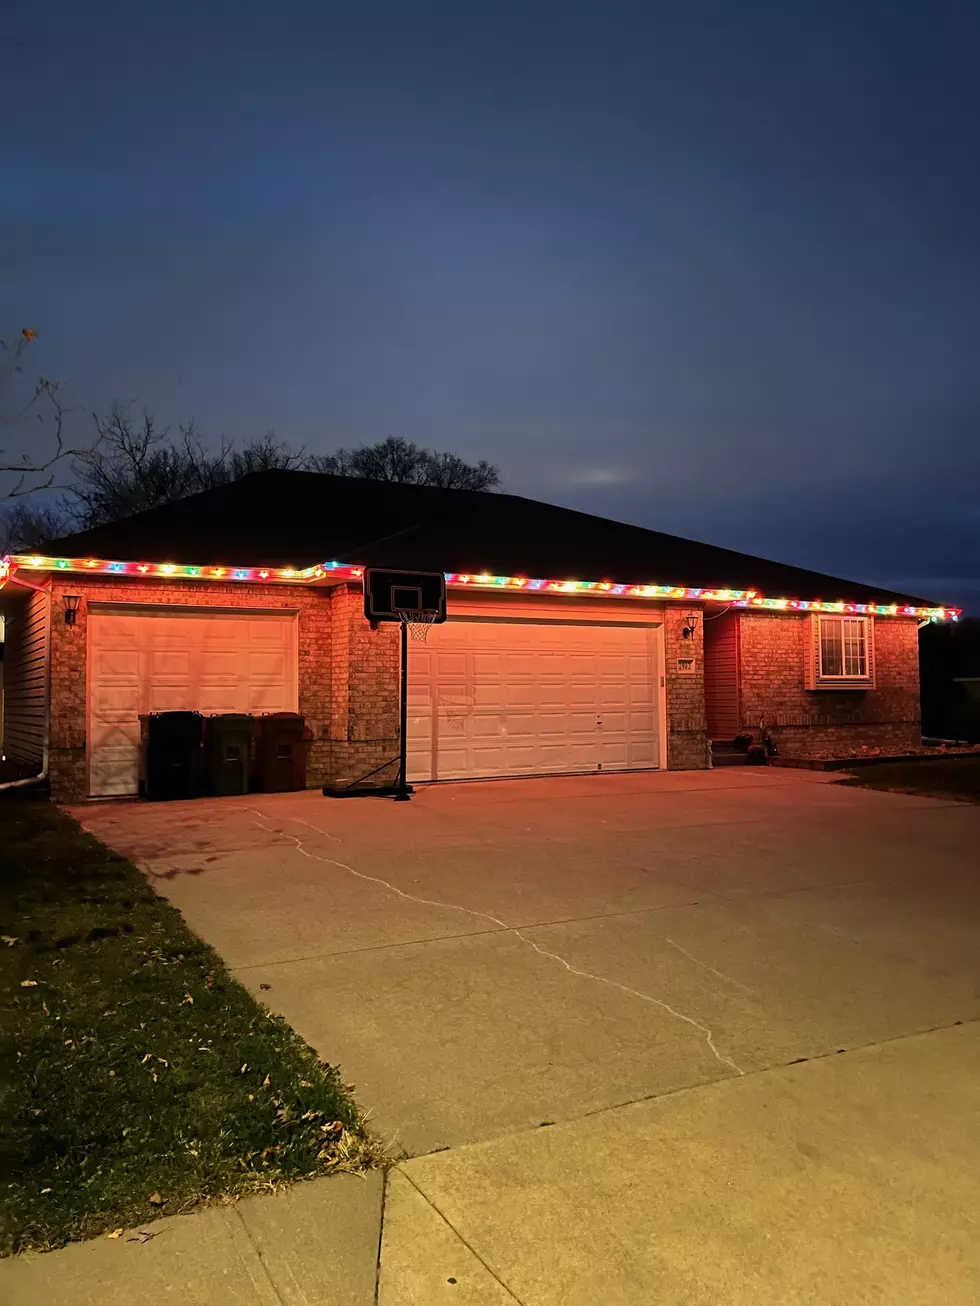 When Should You Put Up Those Outdoor Christmas Lights?